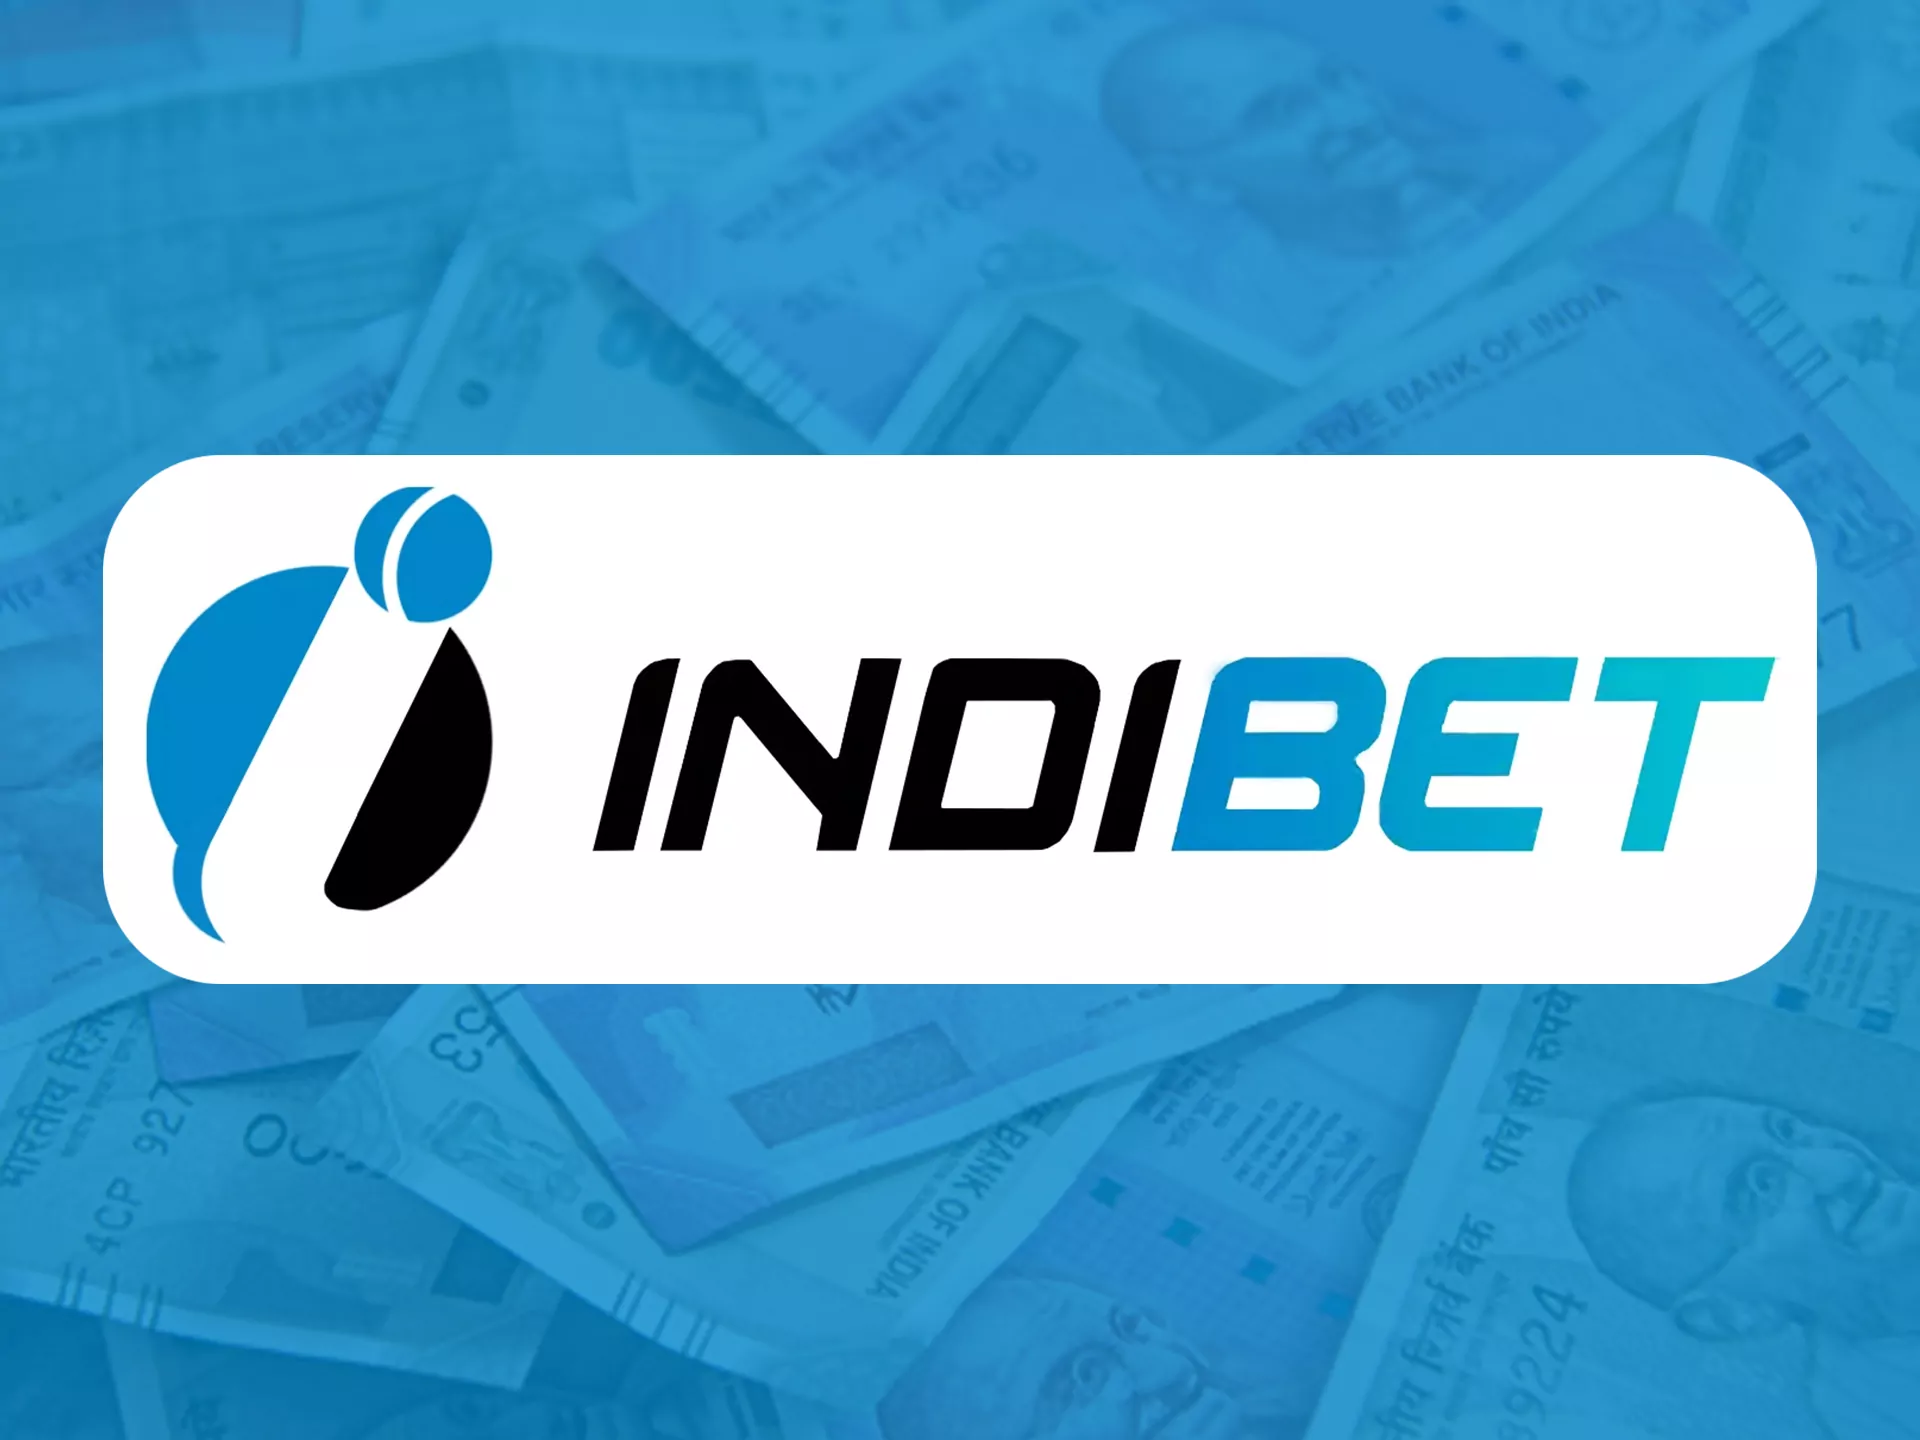 Withdraw money from Indibet without problems.